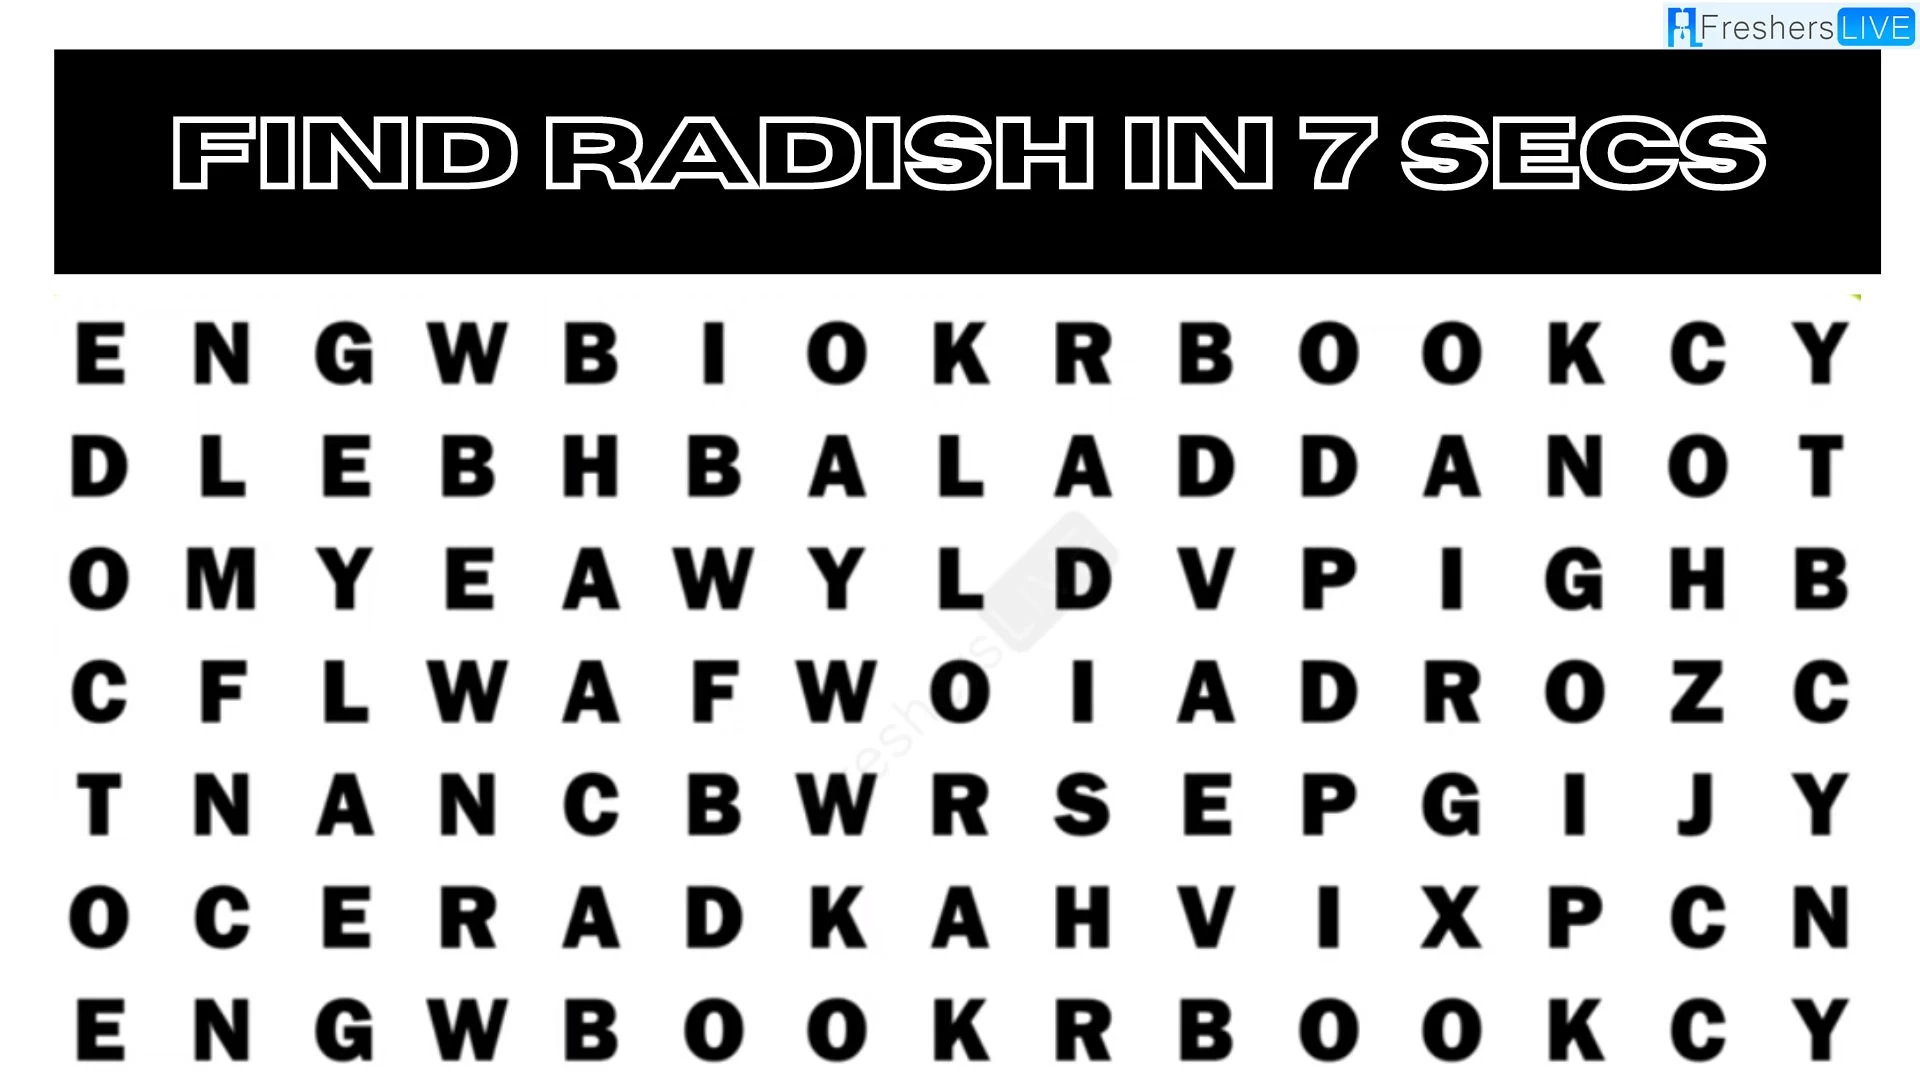 Are you smart enough to Find the word Radish in the Word Puzzle in Under 7 Seconds